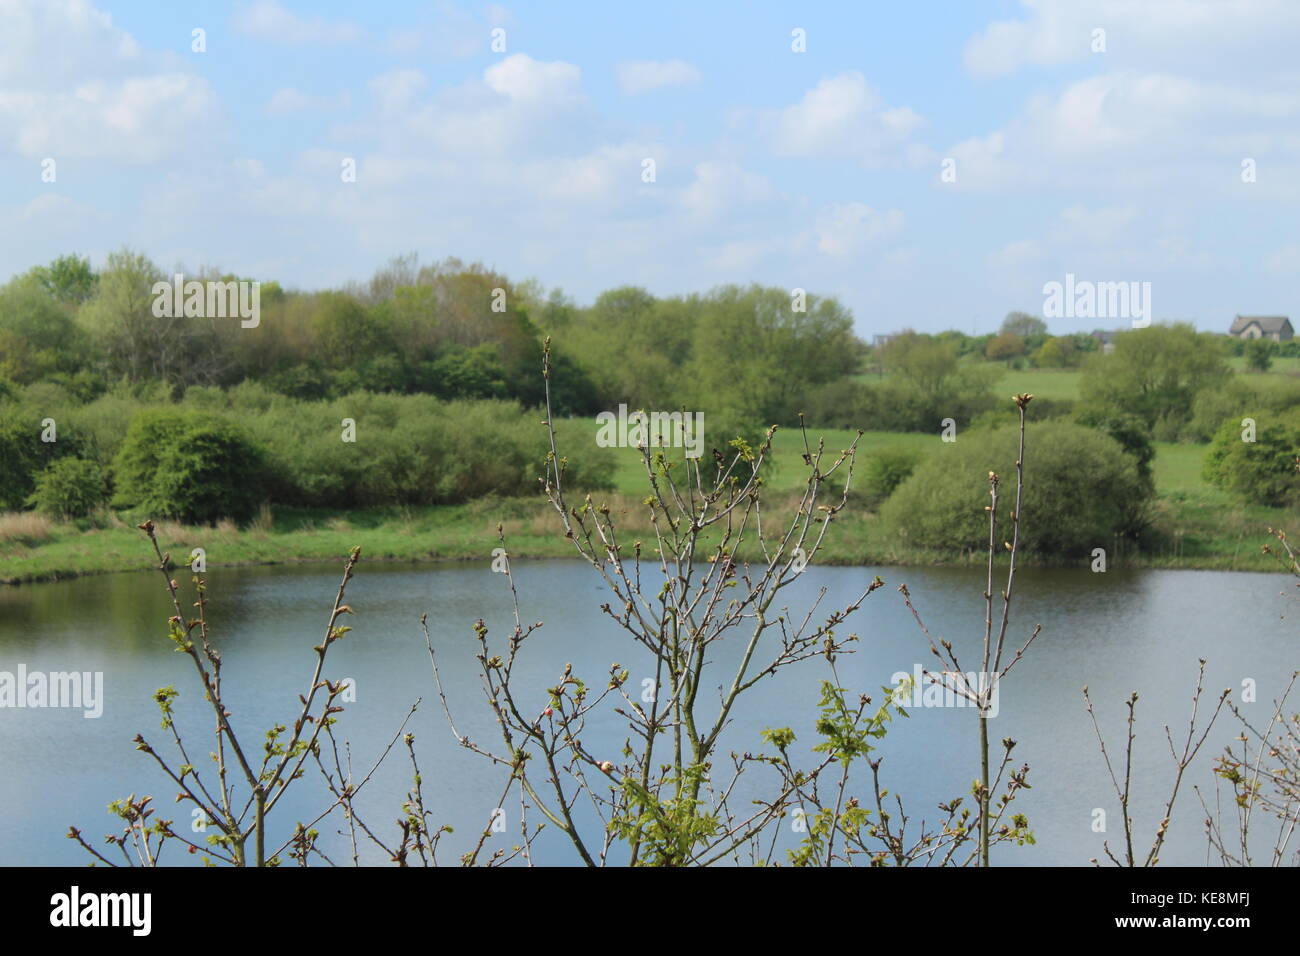 Scenic view overlooking a lake on a sunny day, with white clouds in a blue sky and trees in the foreground  - Scotsmans Flash, Wigan, England Stock Photo